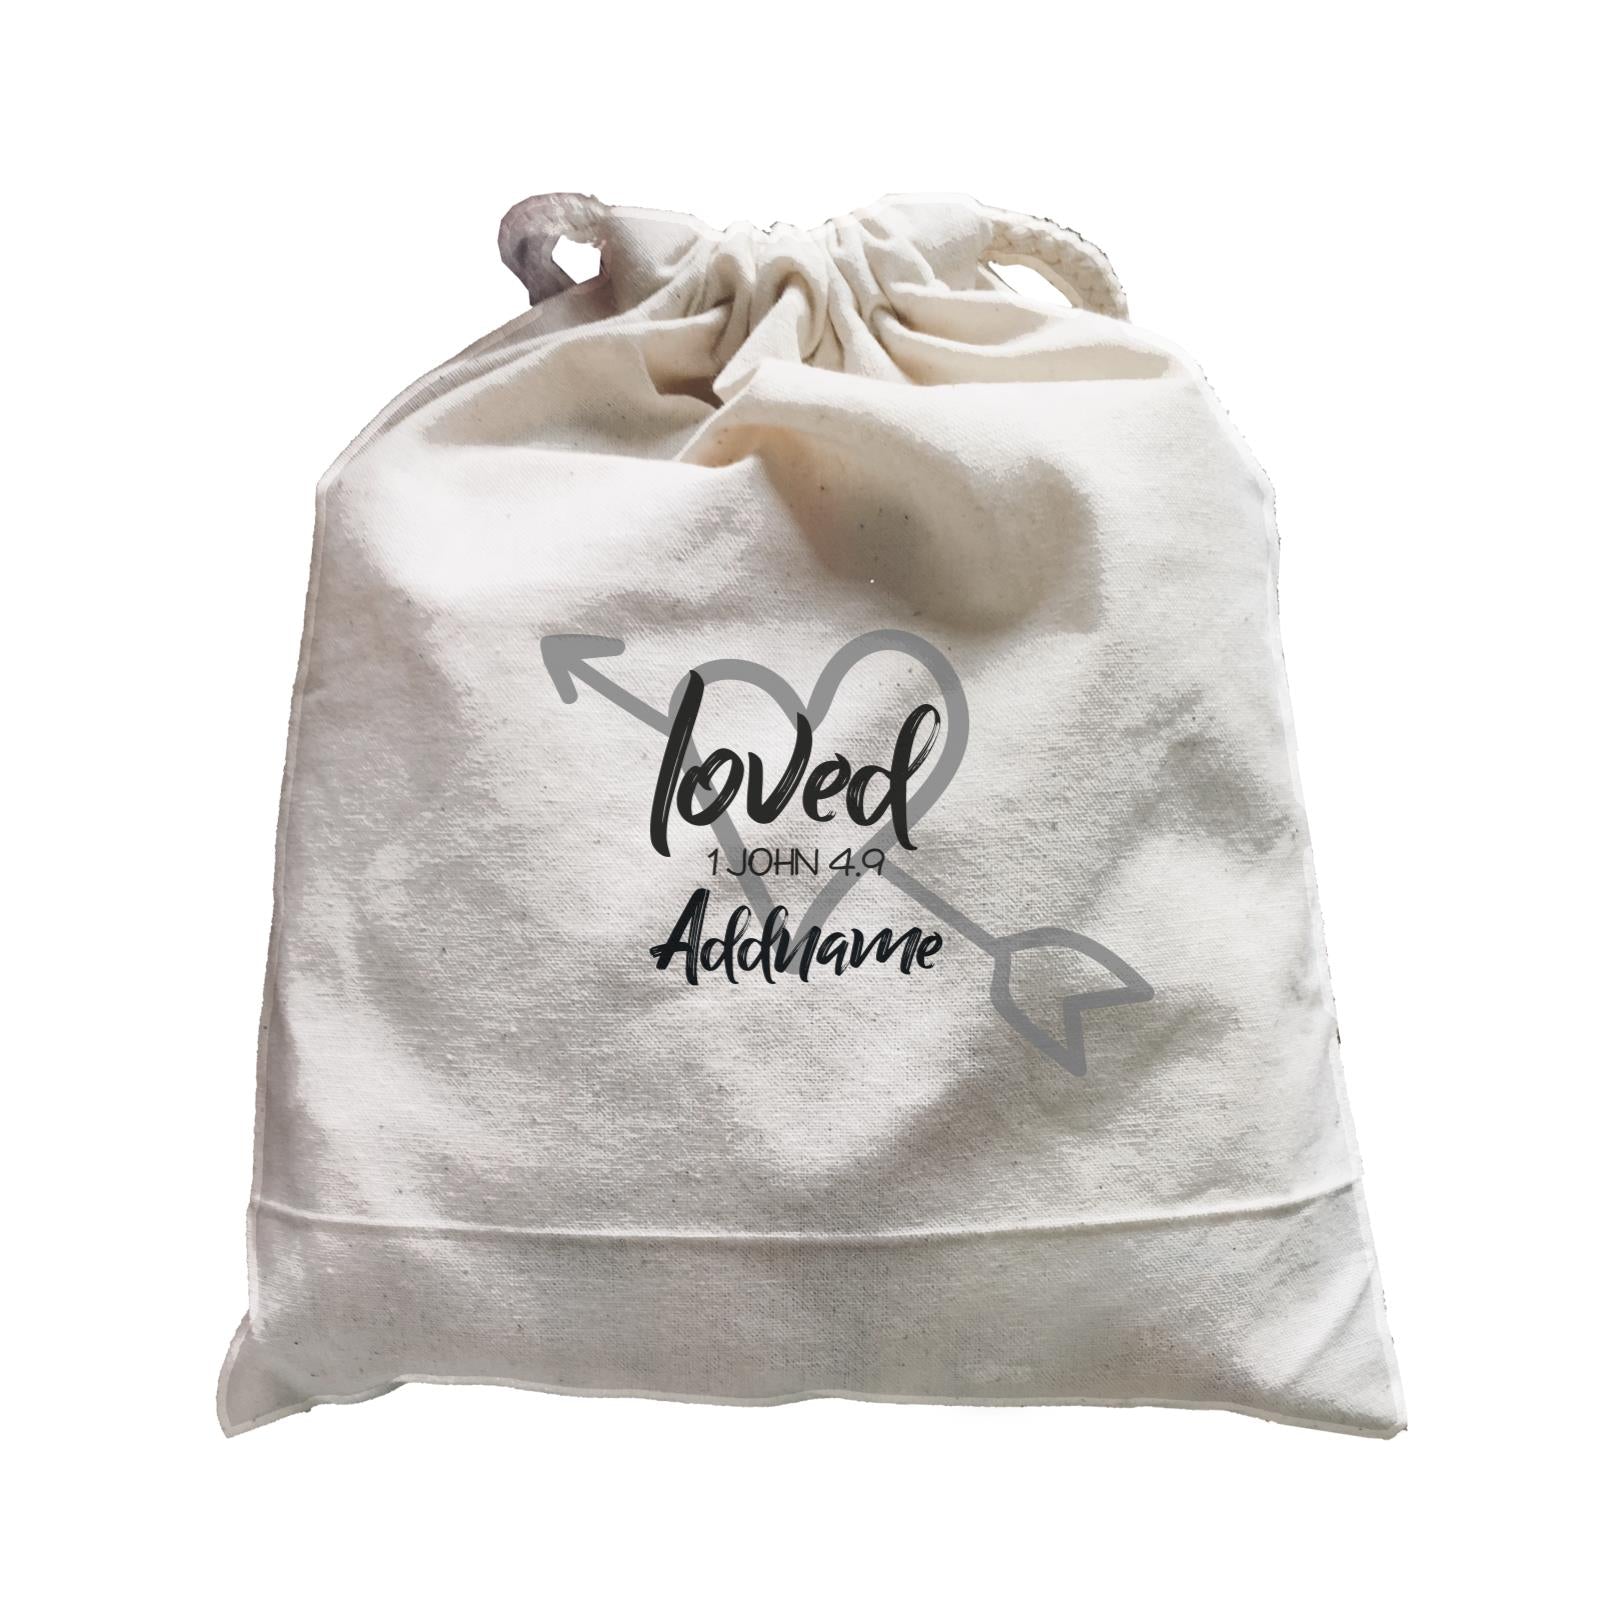 Loved Family Loved With Heart And Arrow 1 John 4.9 Addname Accessories Satchel